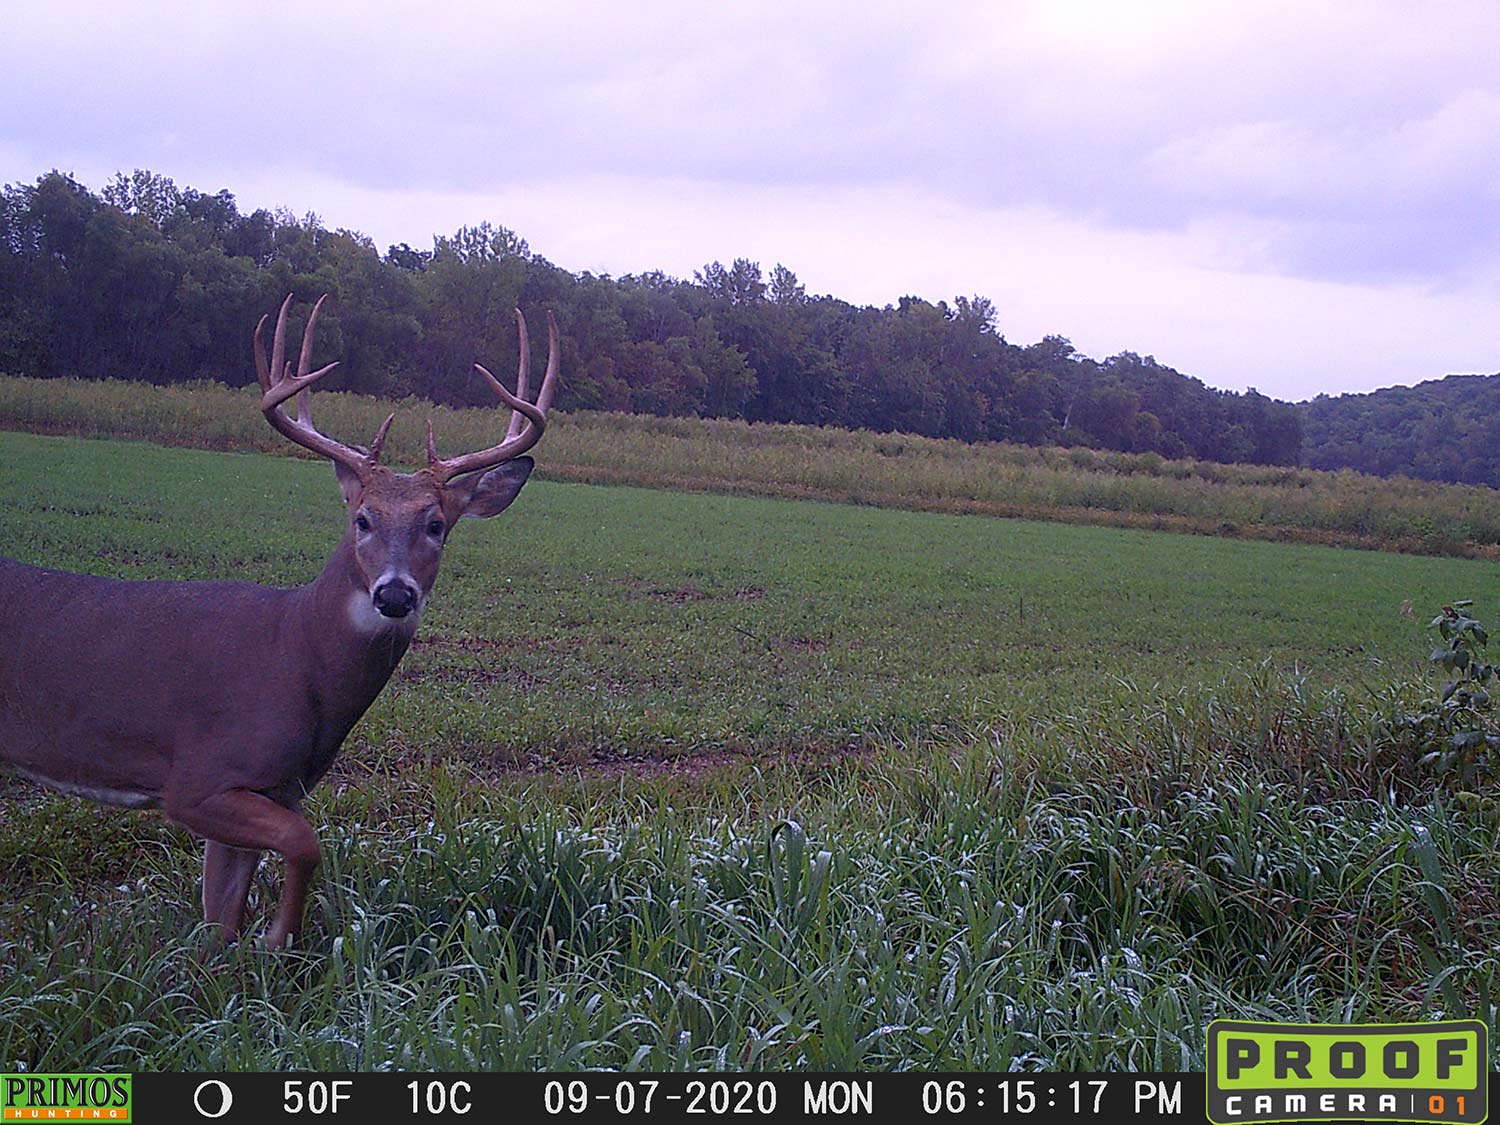 A Proof Camera trail cam photograph showing a whitetail duck walking through a food plot.